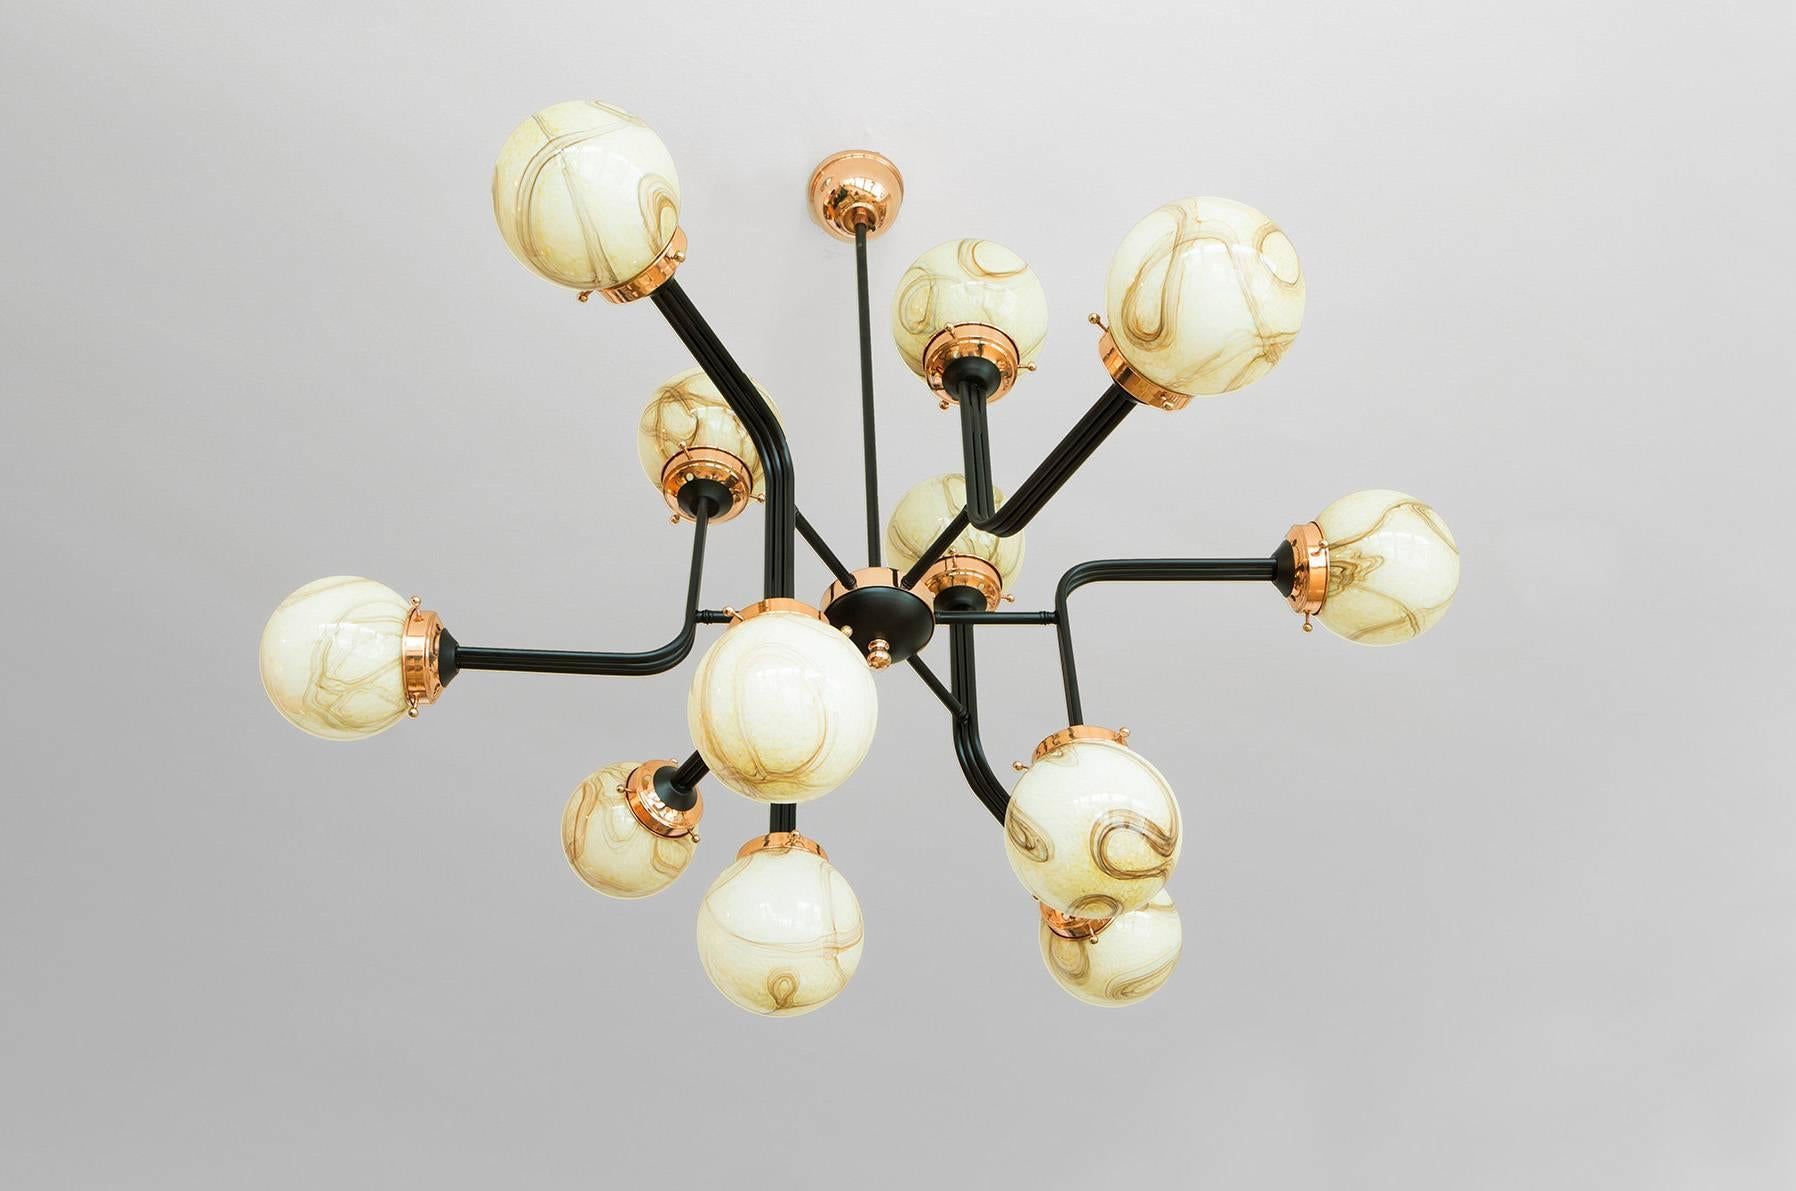 Turkish Ziron Handblown Glass Chandelier with Black Painted Metal and Copper For Sale